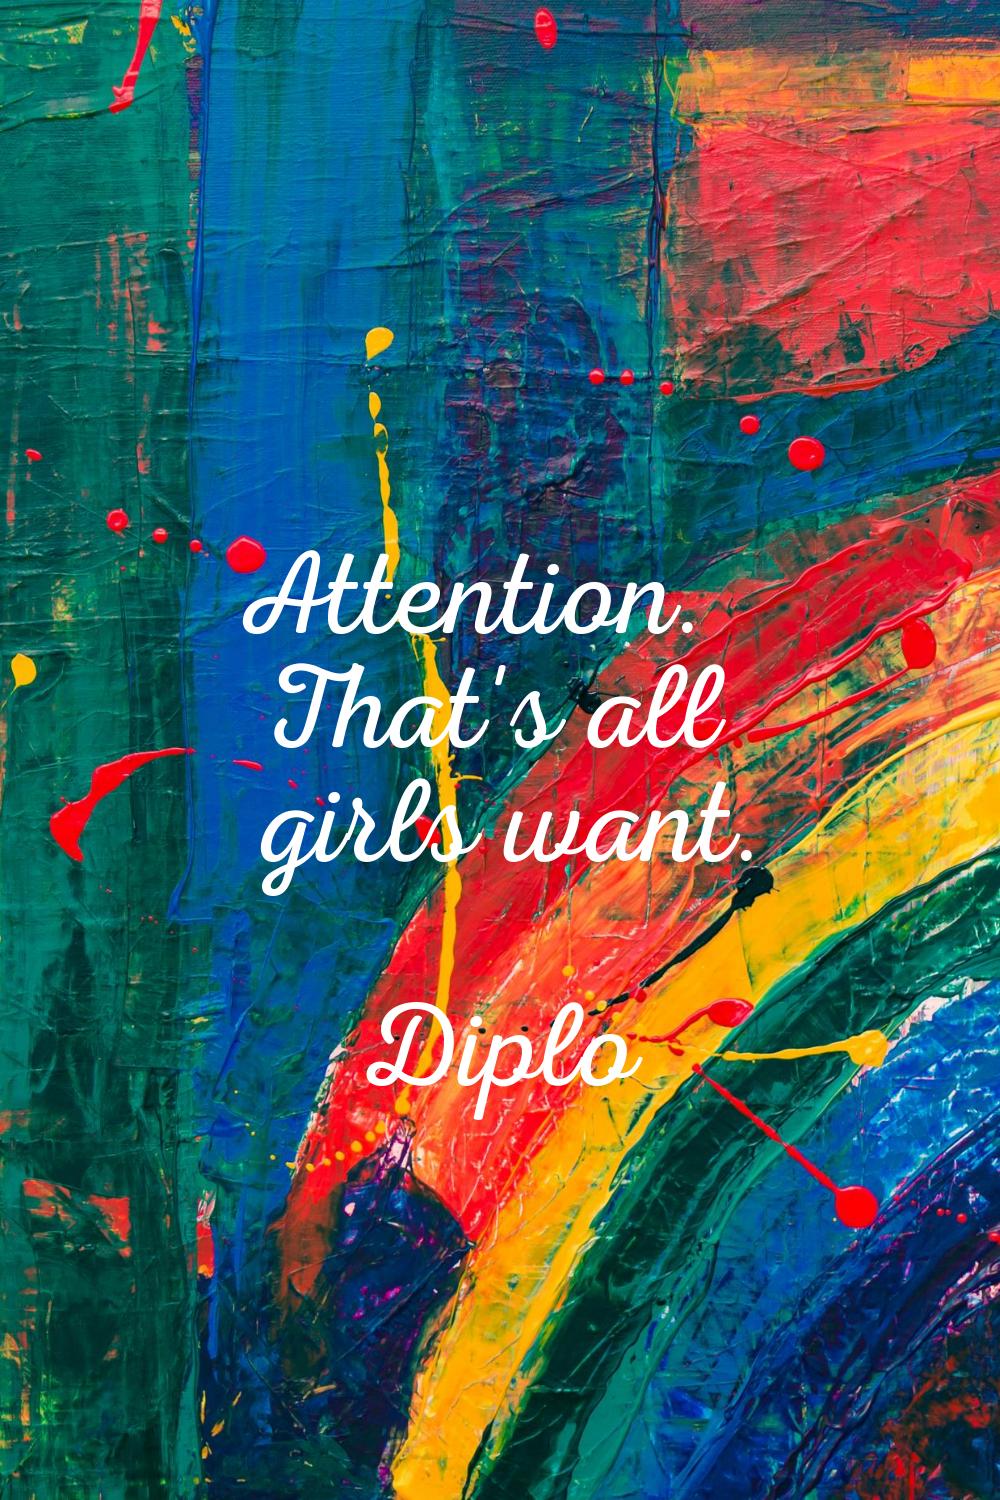 Attention. That's all girls want.